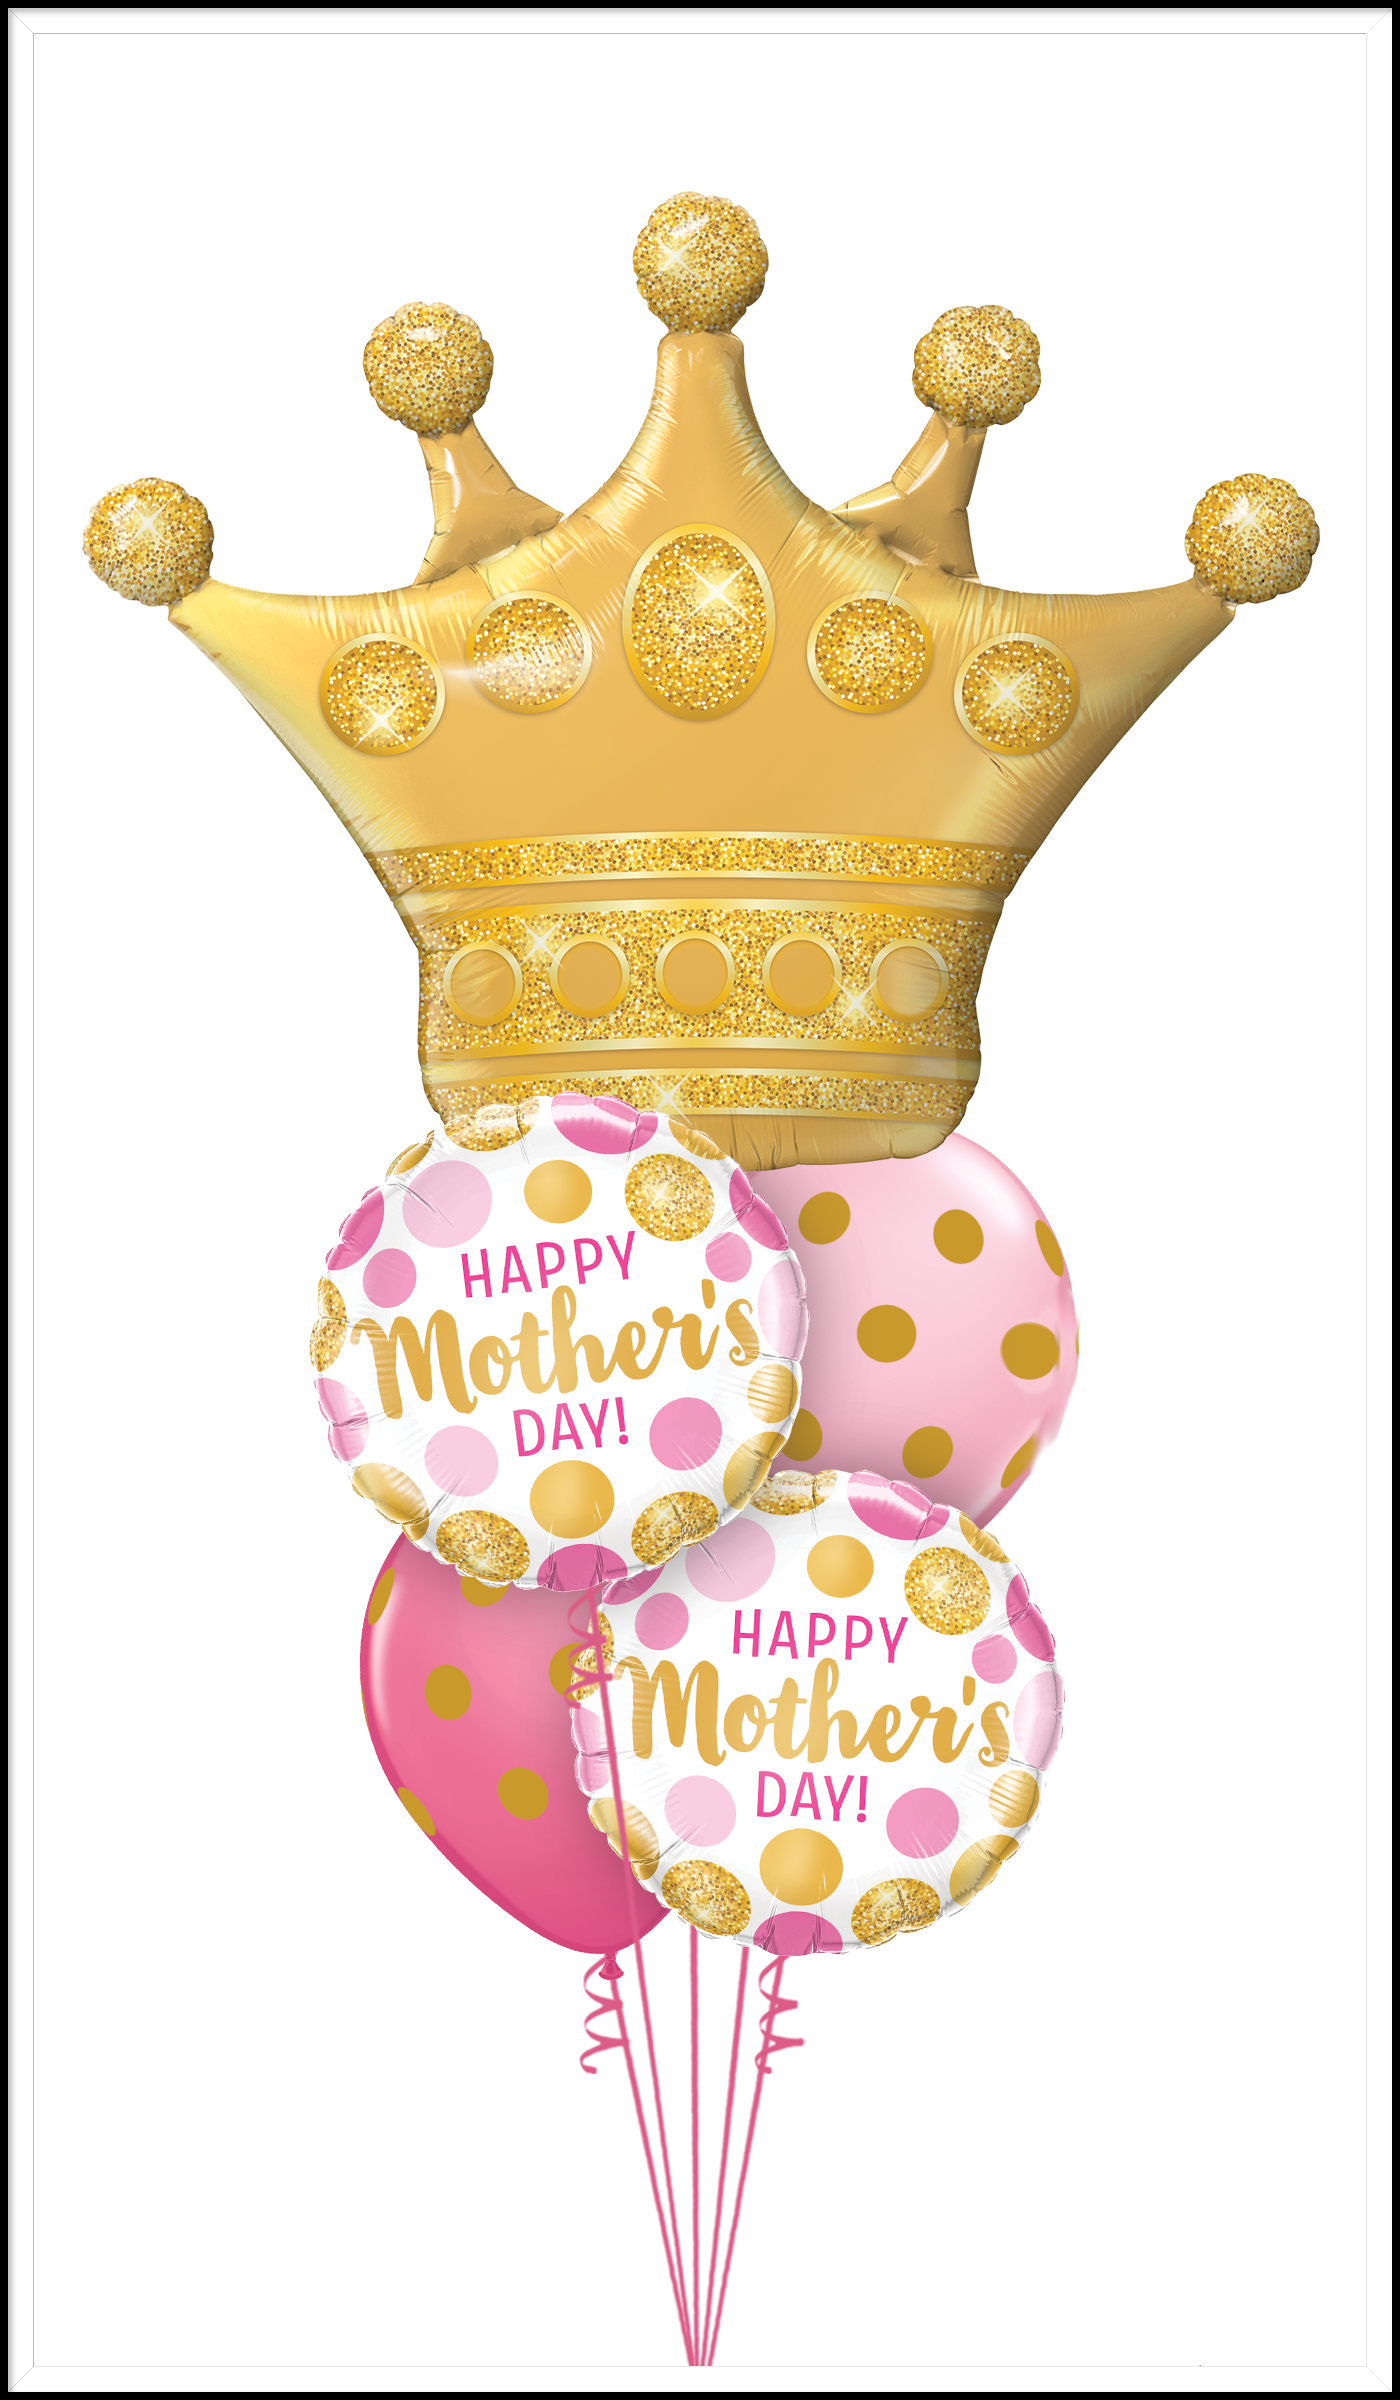 Mothers day crown bouquet